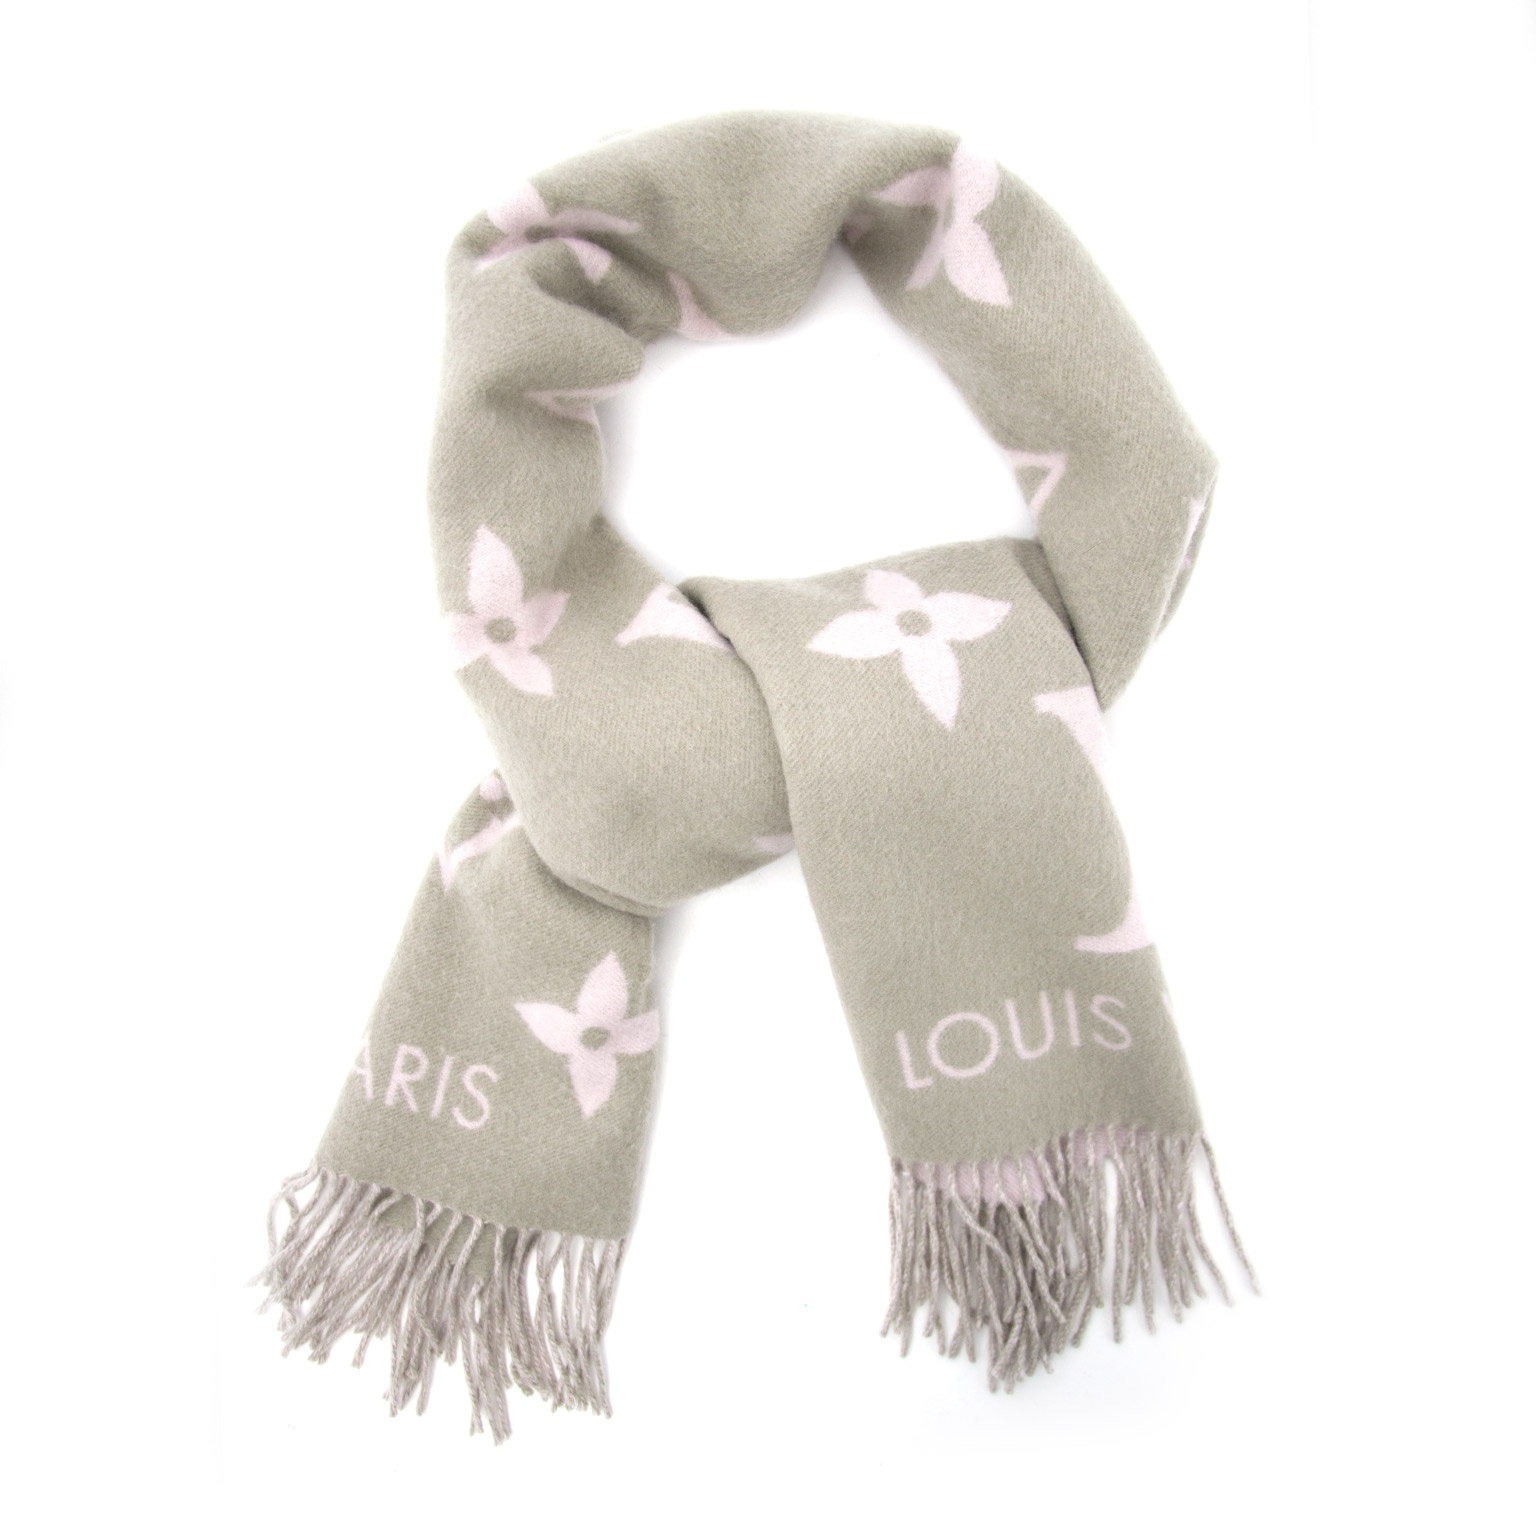 Louis Vuitton - Authenticated Reykjavik Scarf - Cashmere Multicolour Plain for Women, Never Worn, with Tag